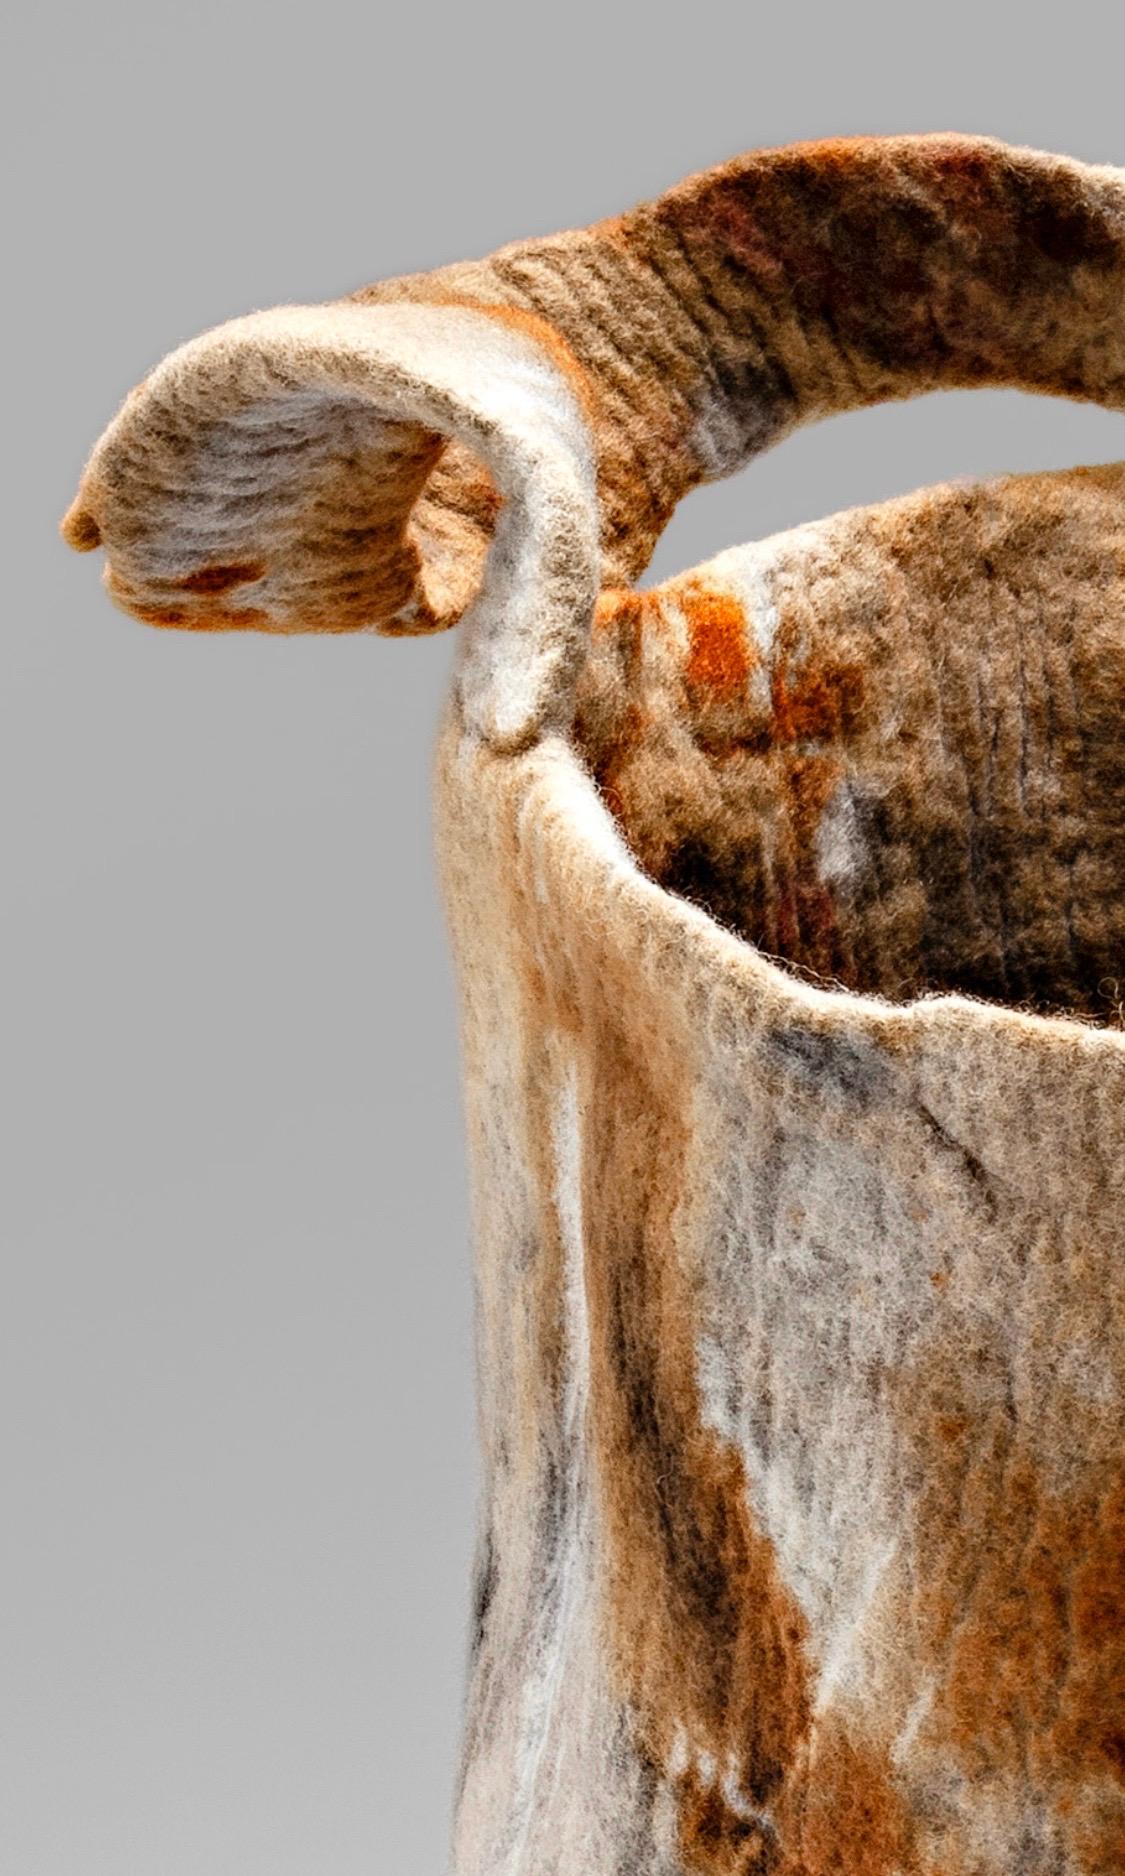 Rustic “Gracioso”, 2020, Naturally Dyed Felted Wool Vase by Inês Schertel, Brazil